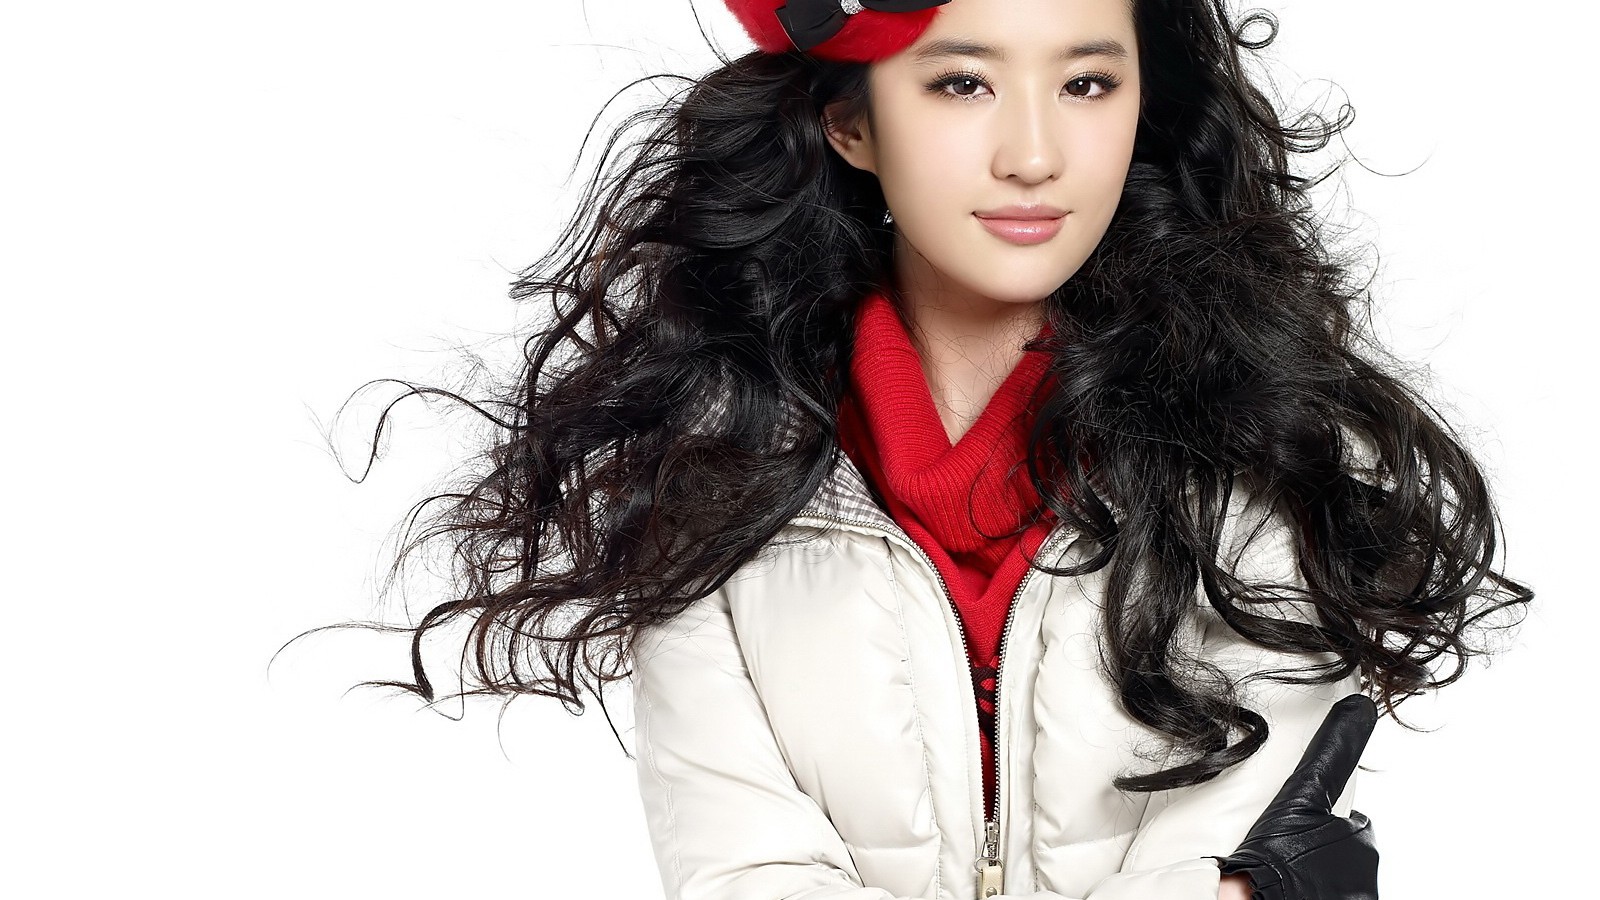 Liu Yifei in Casual Clothes and Cosmetics, No Matter Smiling or ...